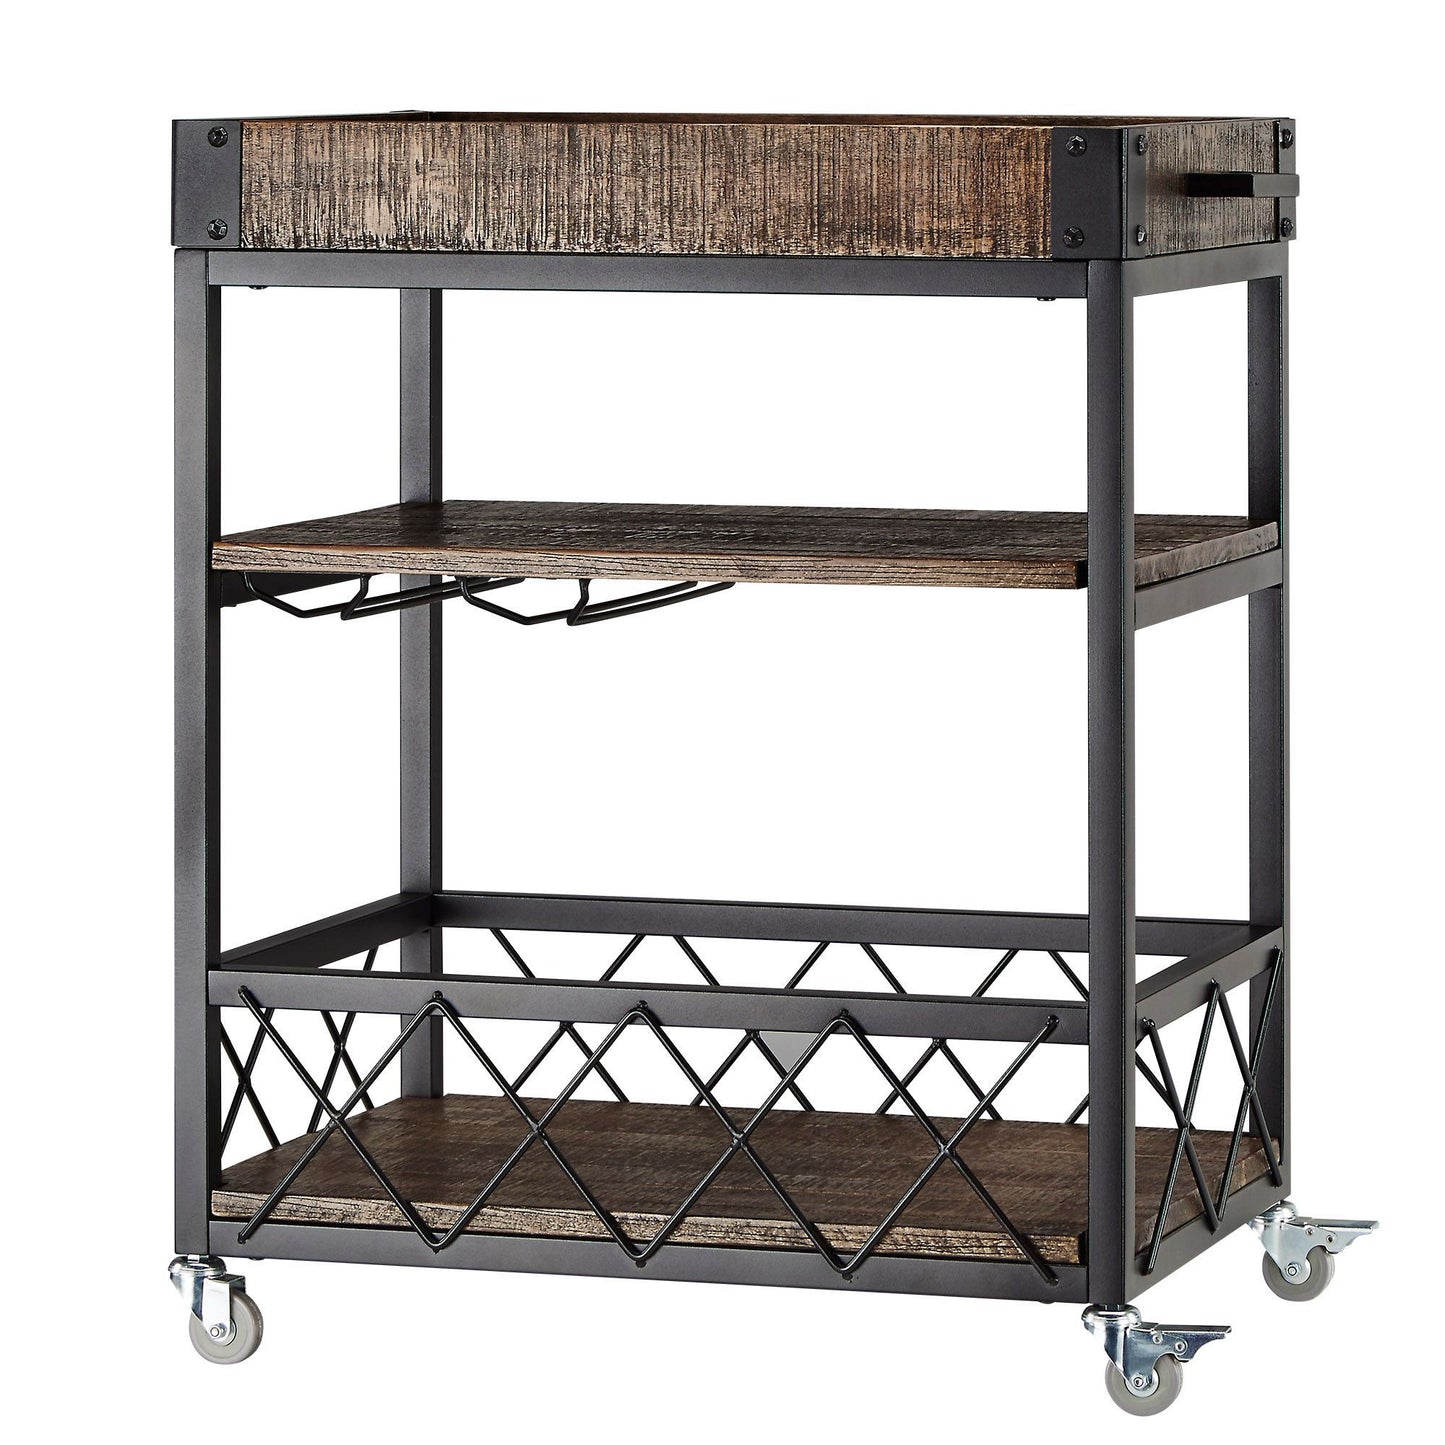 Rustic Serving Cart with Wine Inserts and Removable Tray Top - Brown Finish